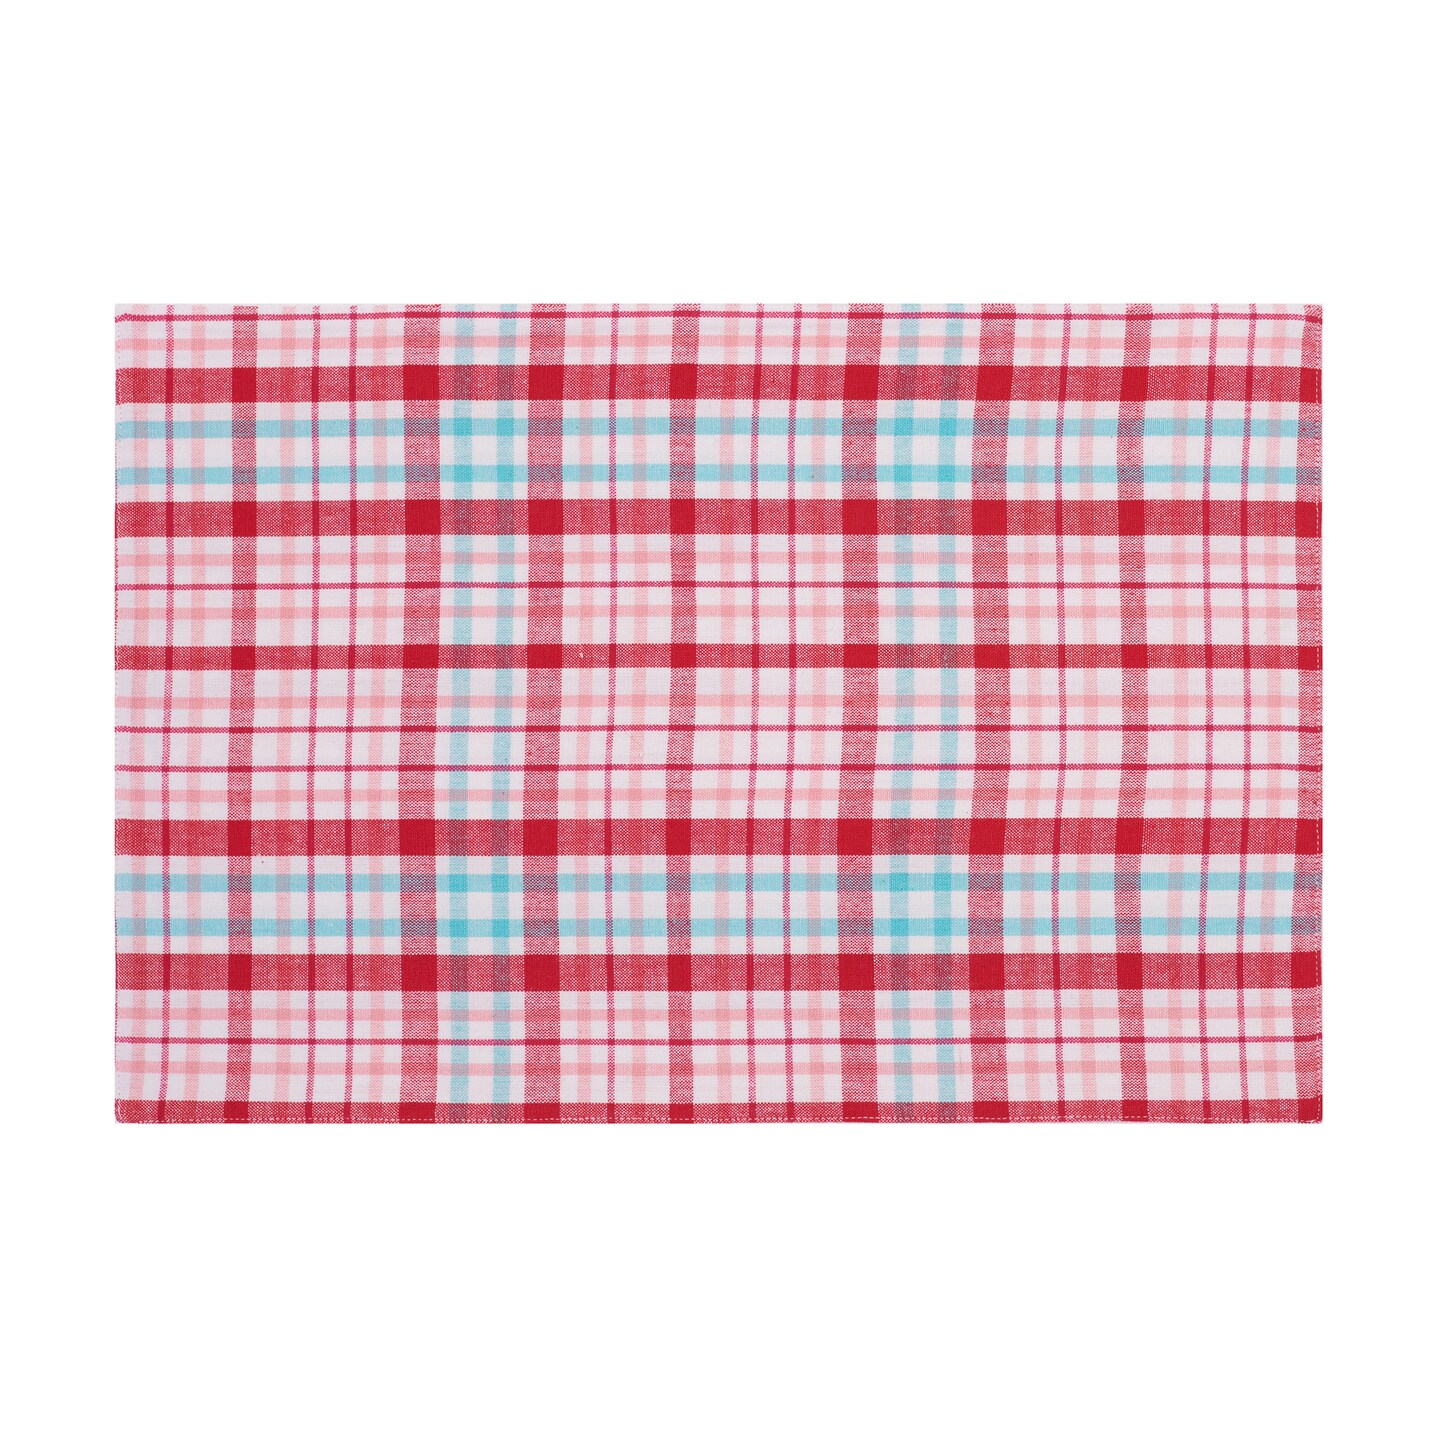 Love Struck Plaid Single Placemat Cotton Machine Washable Tabletop Decorative Dinner Table Mats Red Pink Blue Gingham Cloth Valentine&#x27;s Day